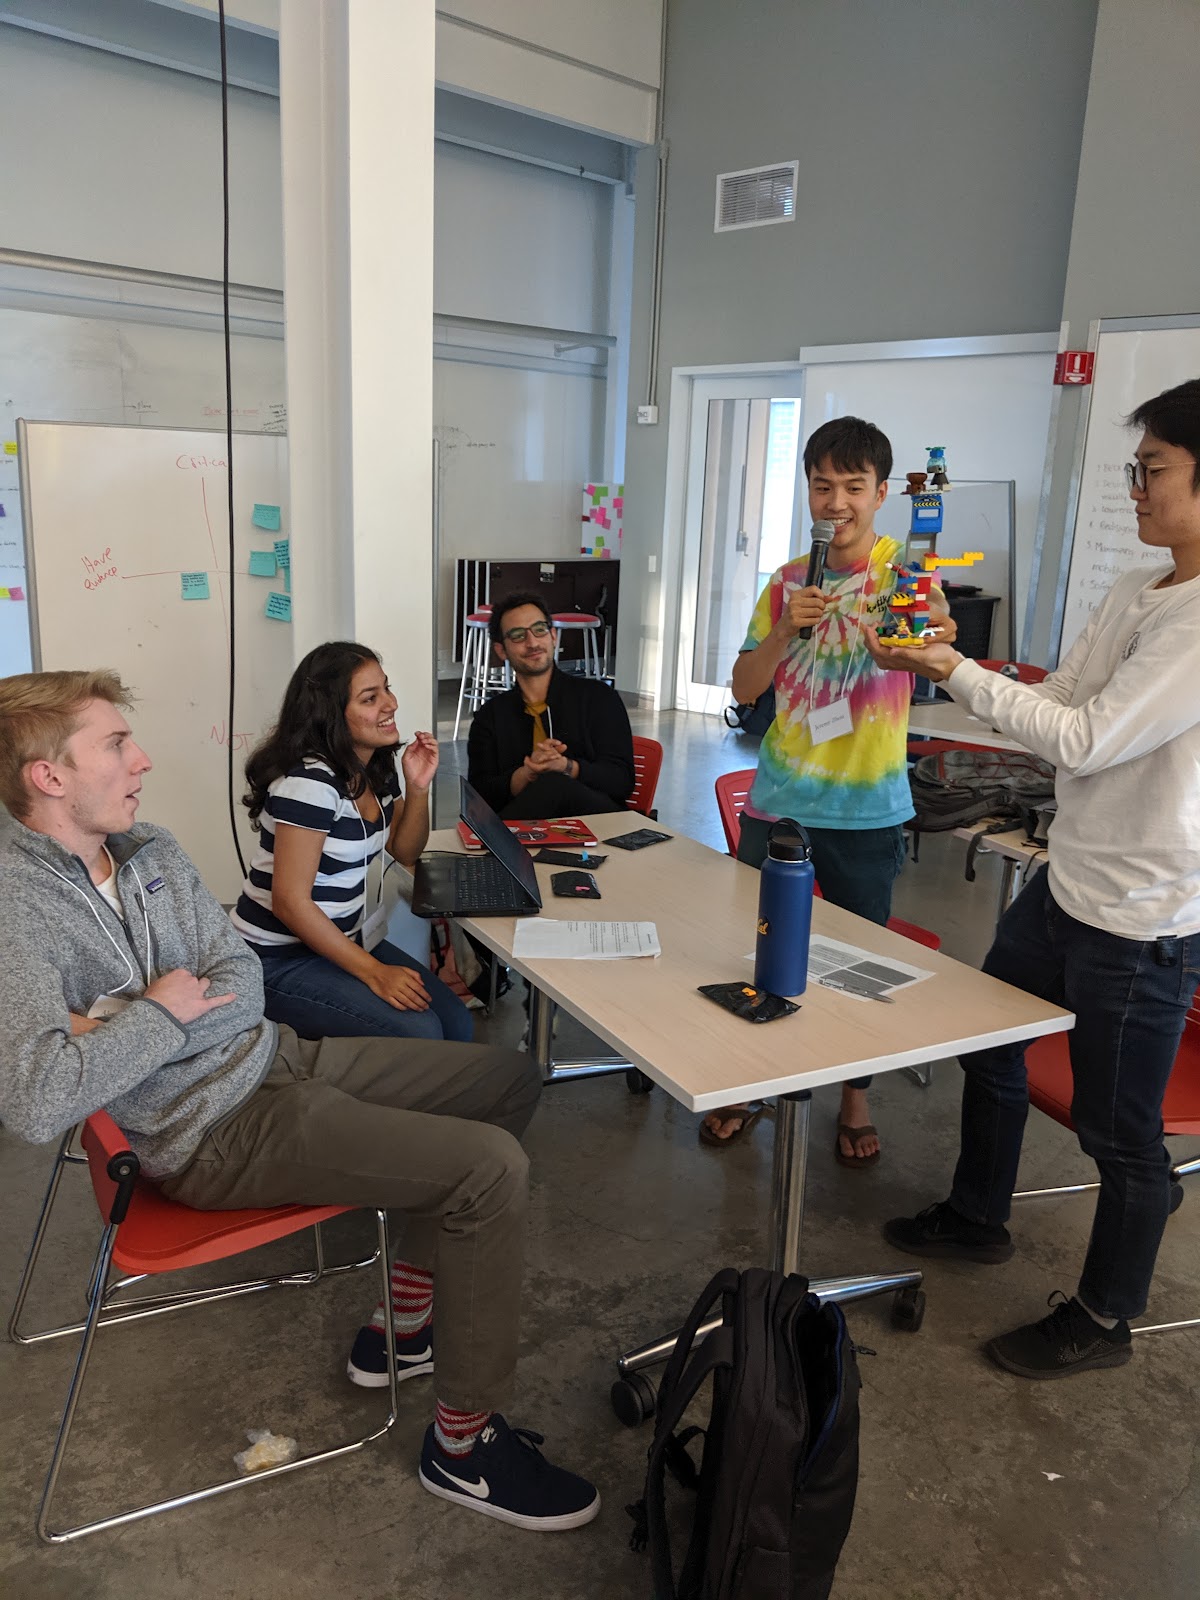 Students participate in group activities in Product Management